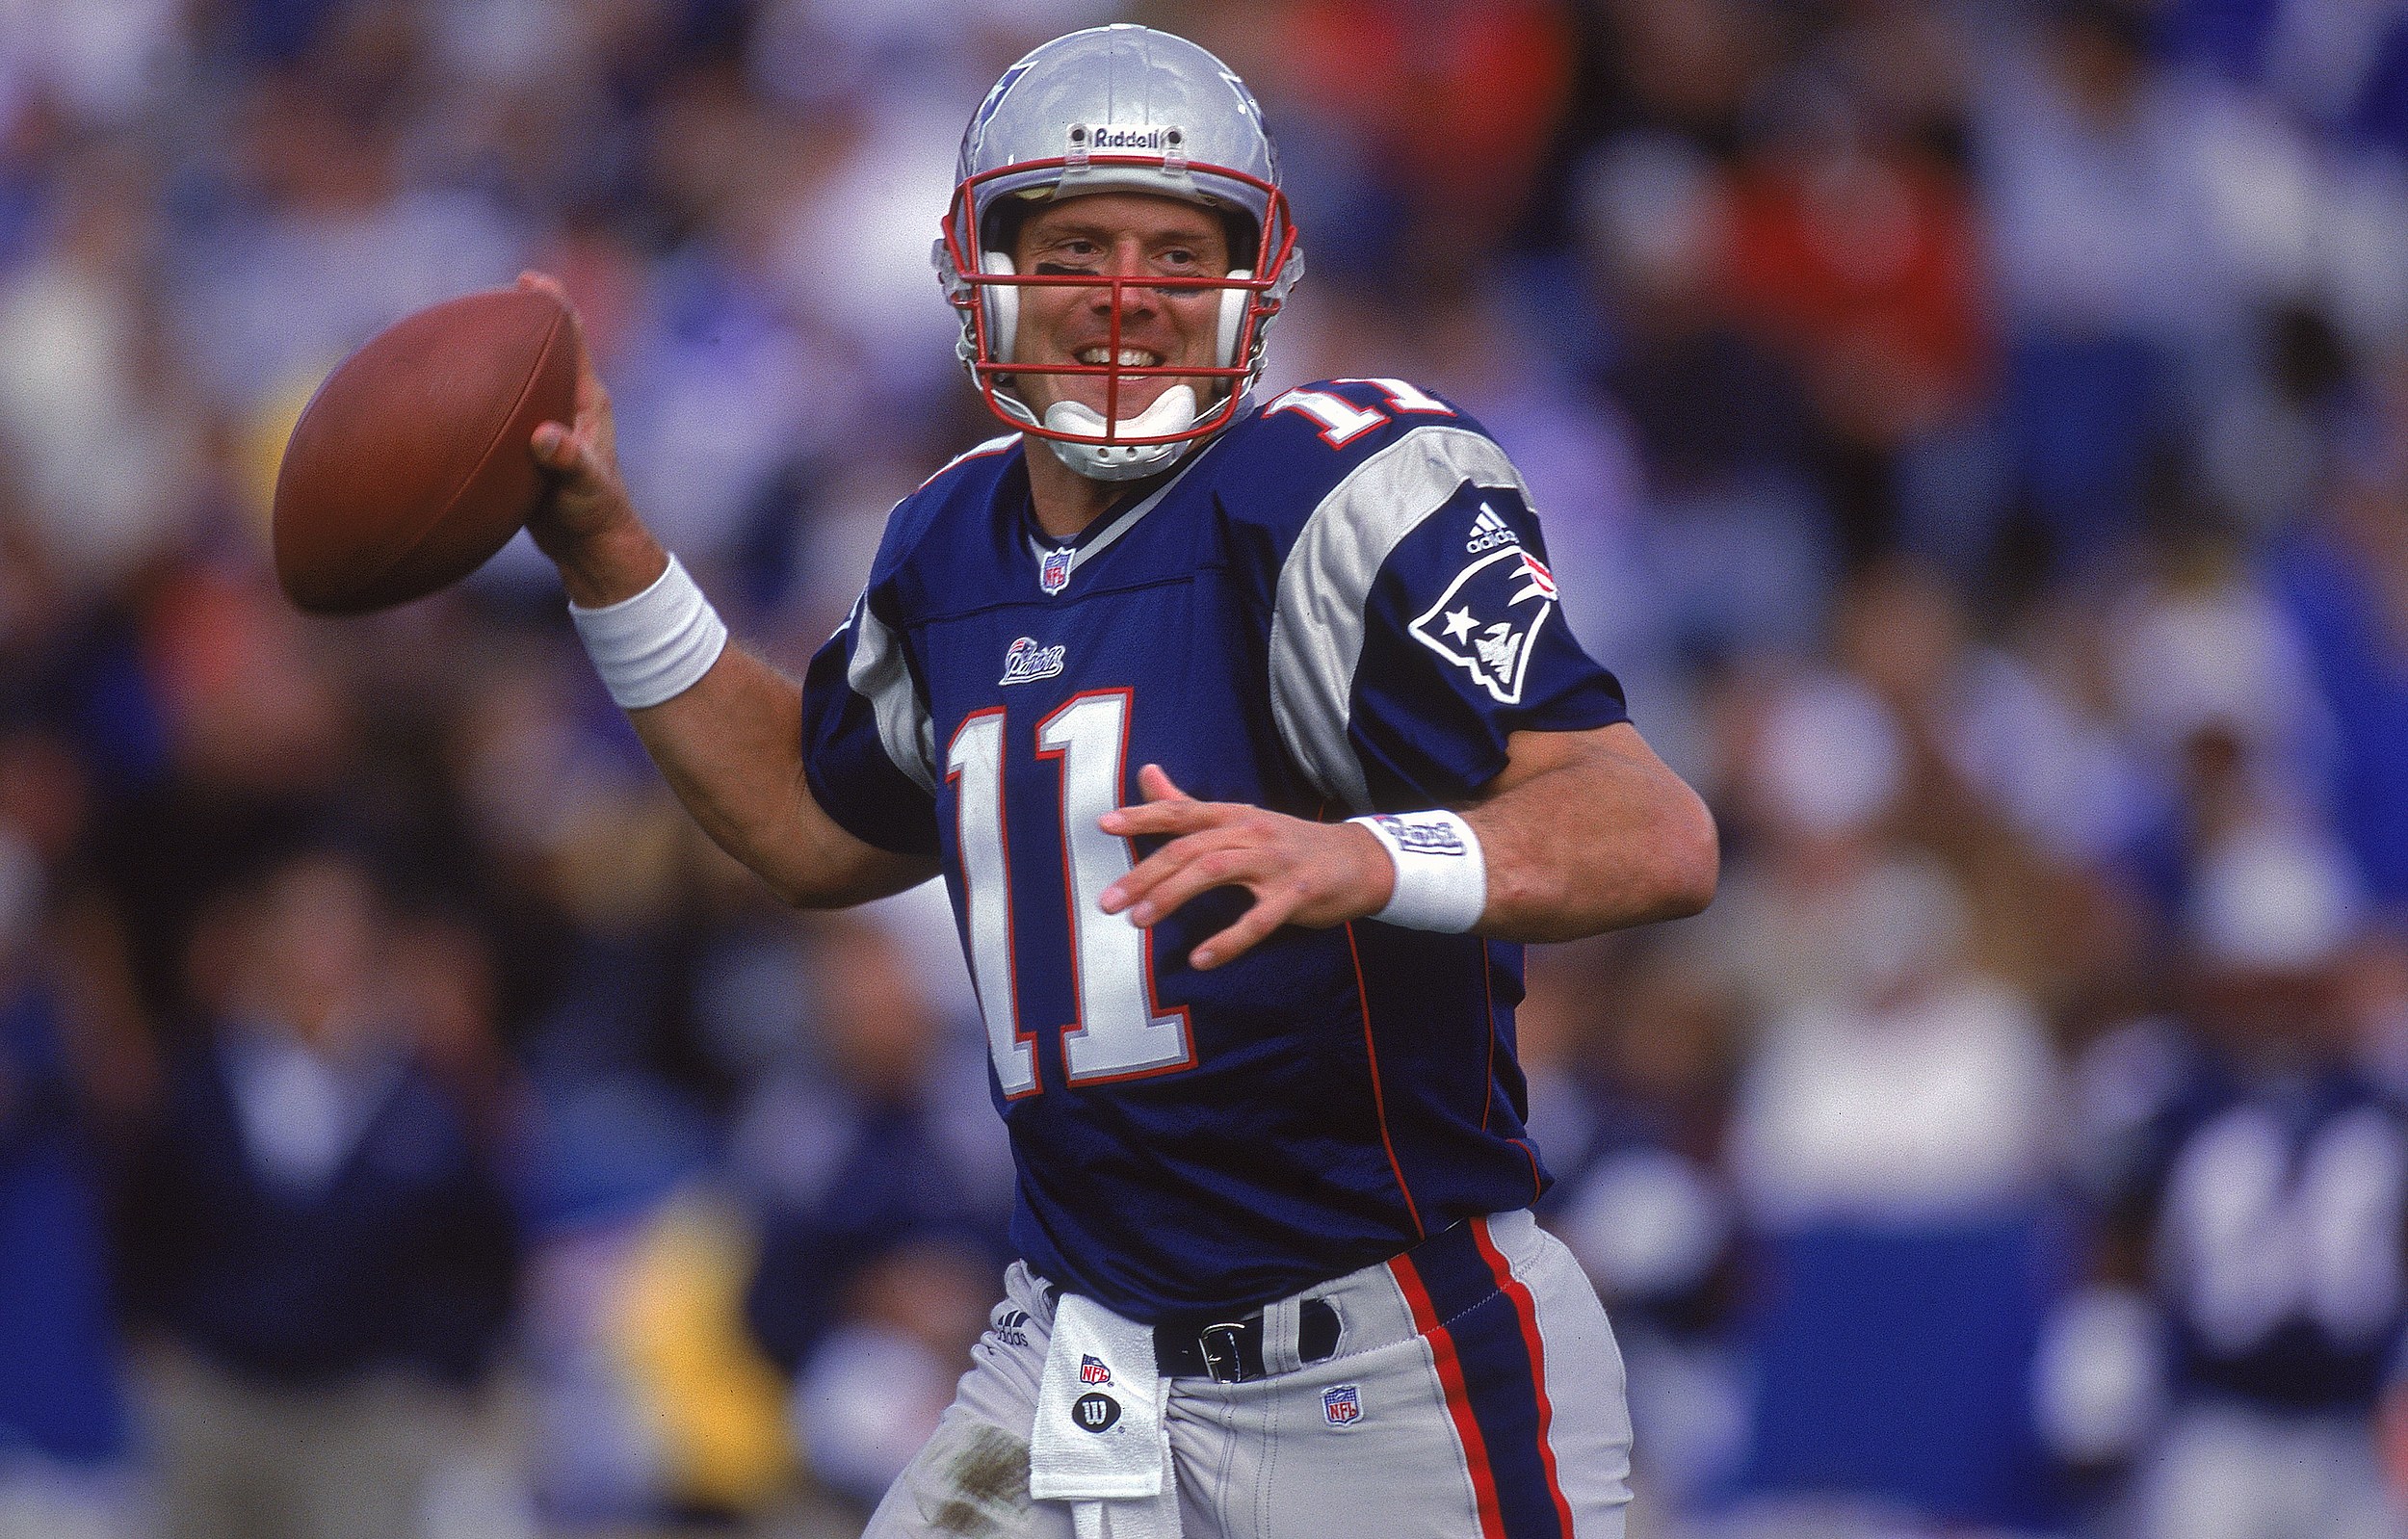 Drew Bledsoe has a story about skiing with Tom Brady